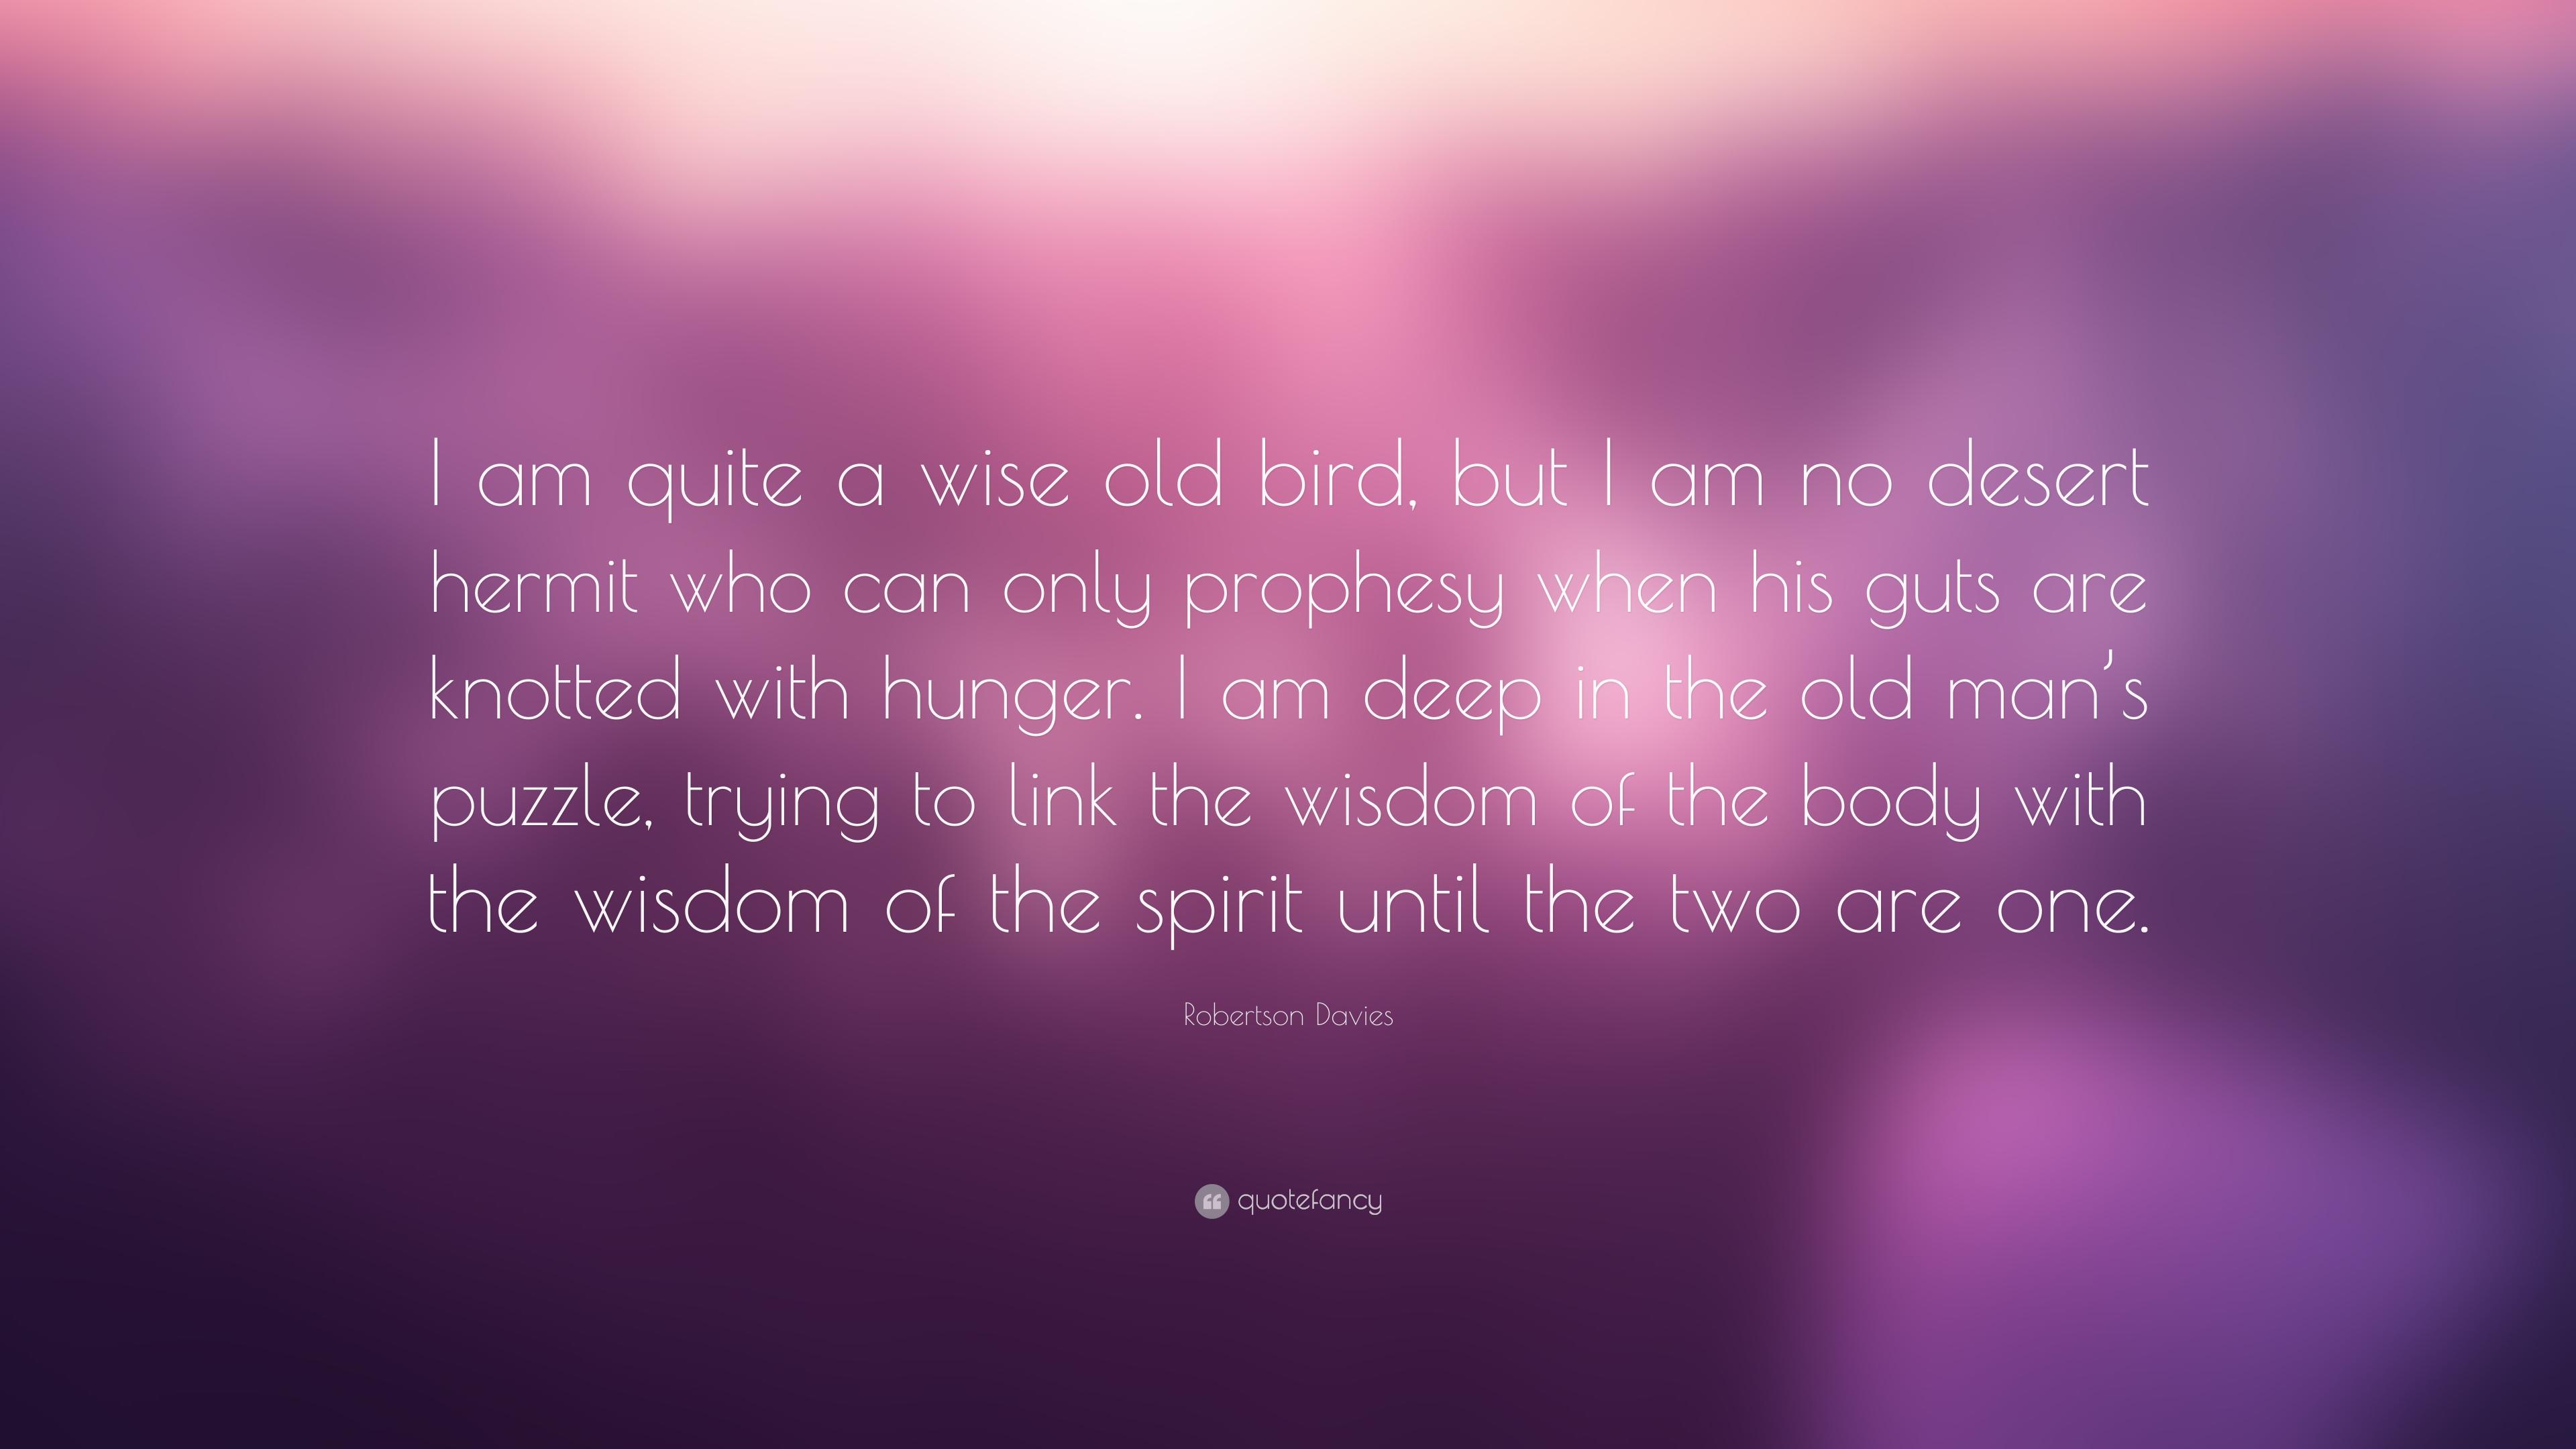 Robertson Davies Quote: “I am quite a wise old bird, but I am no